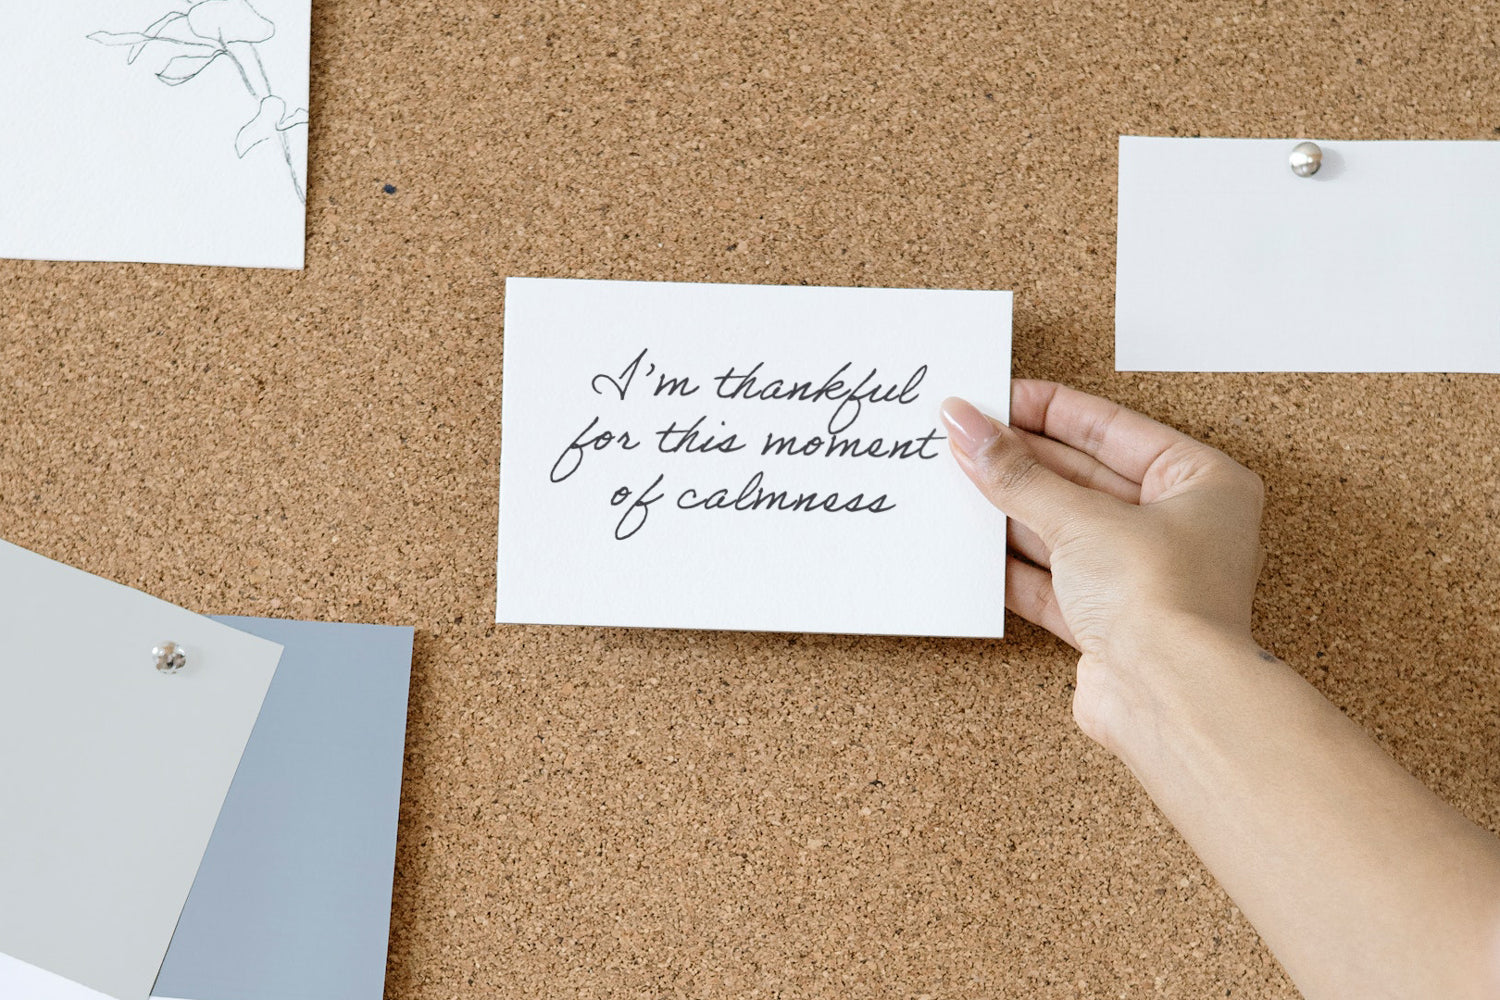 person holding an affirmation in front of a corkboard